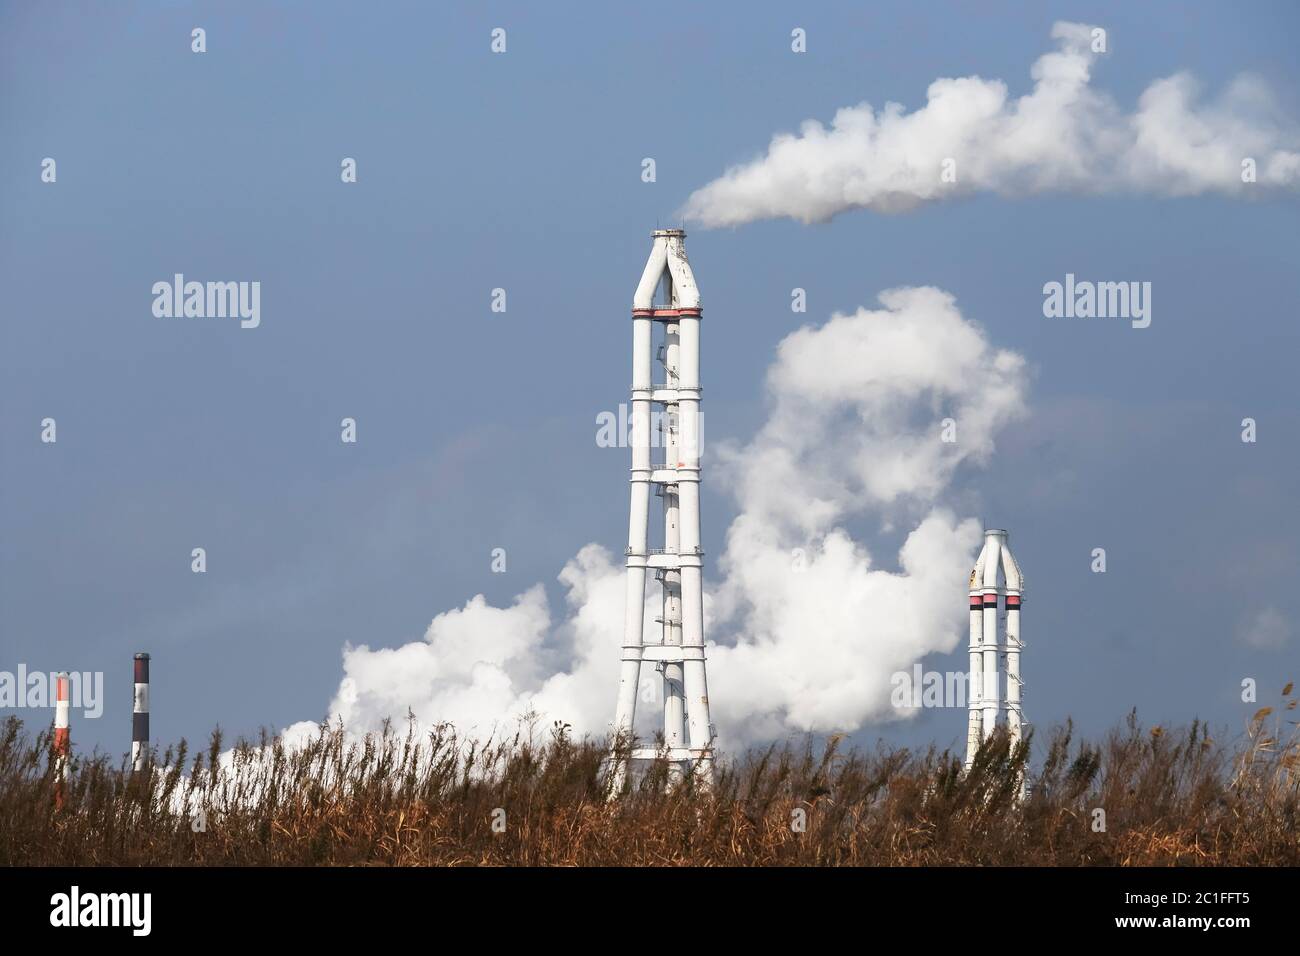 Industrial smokestack with smoke against a blue sky Stock Photo